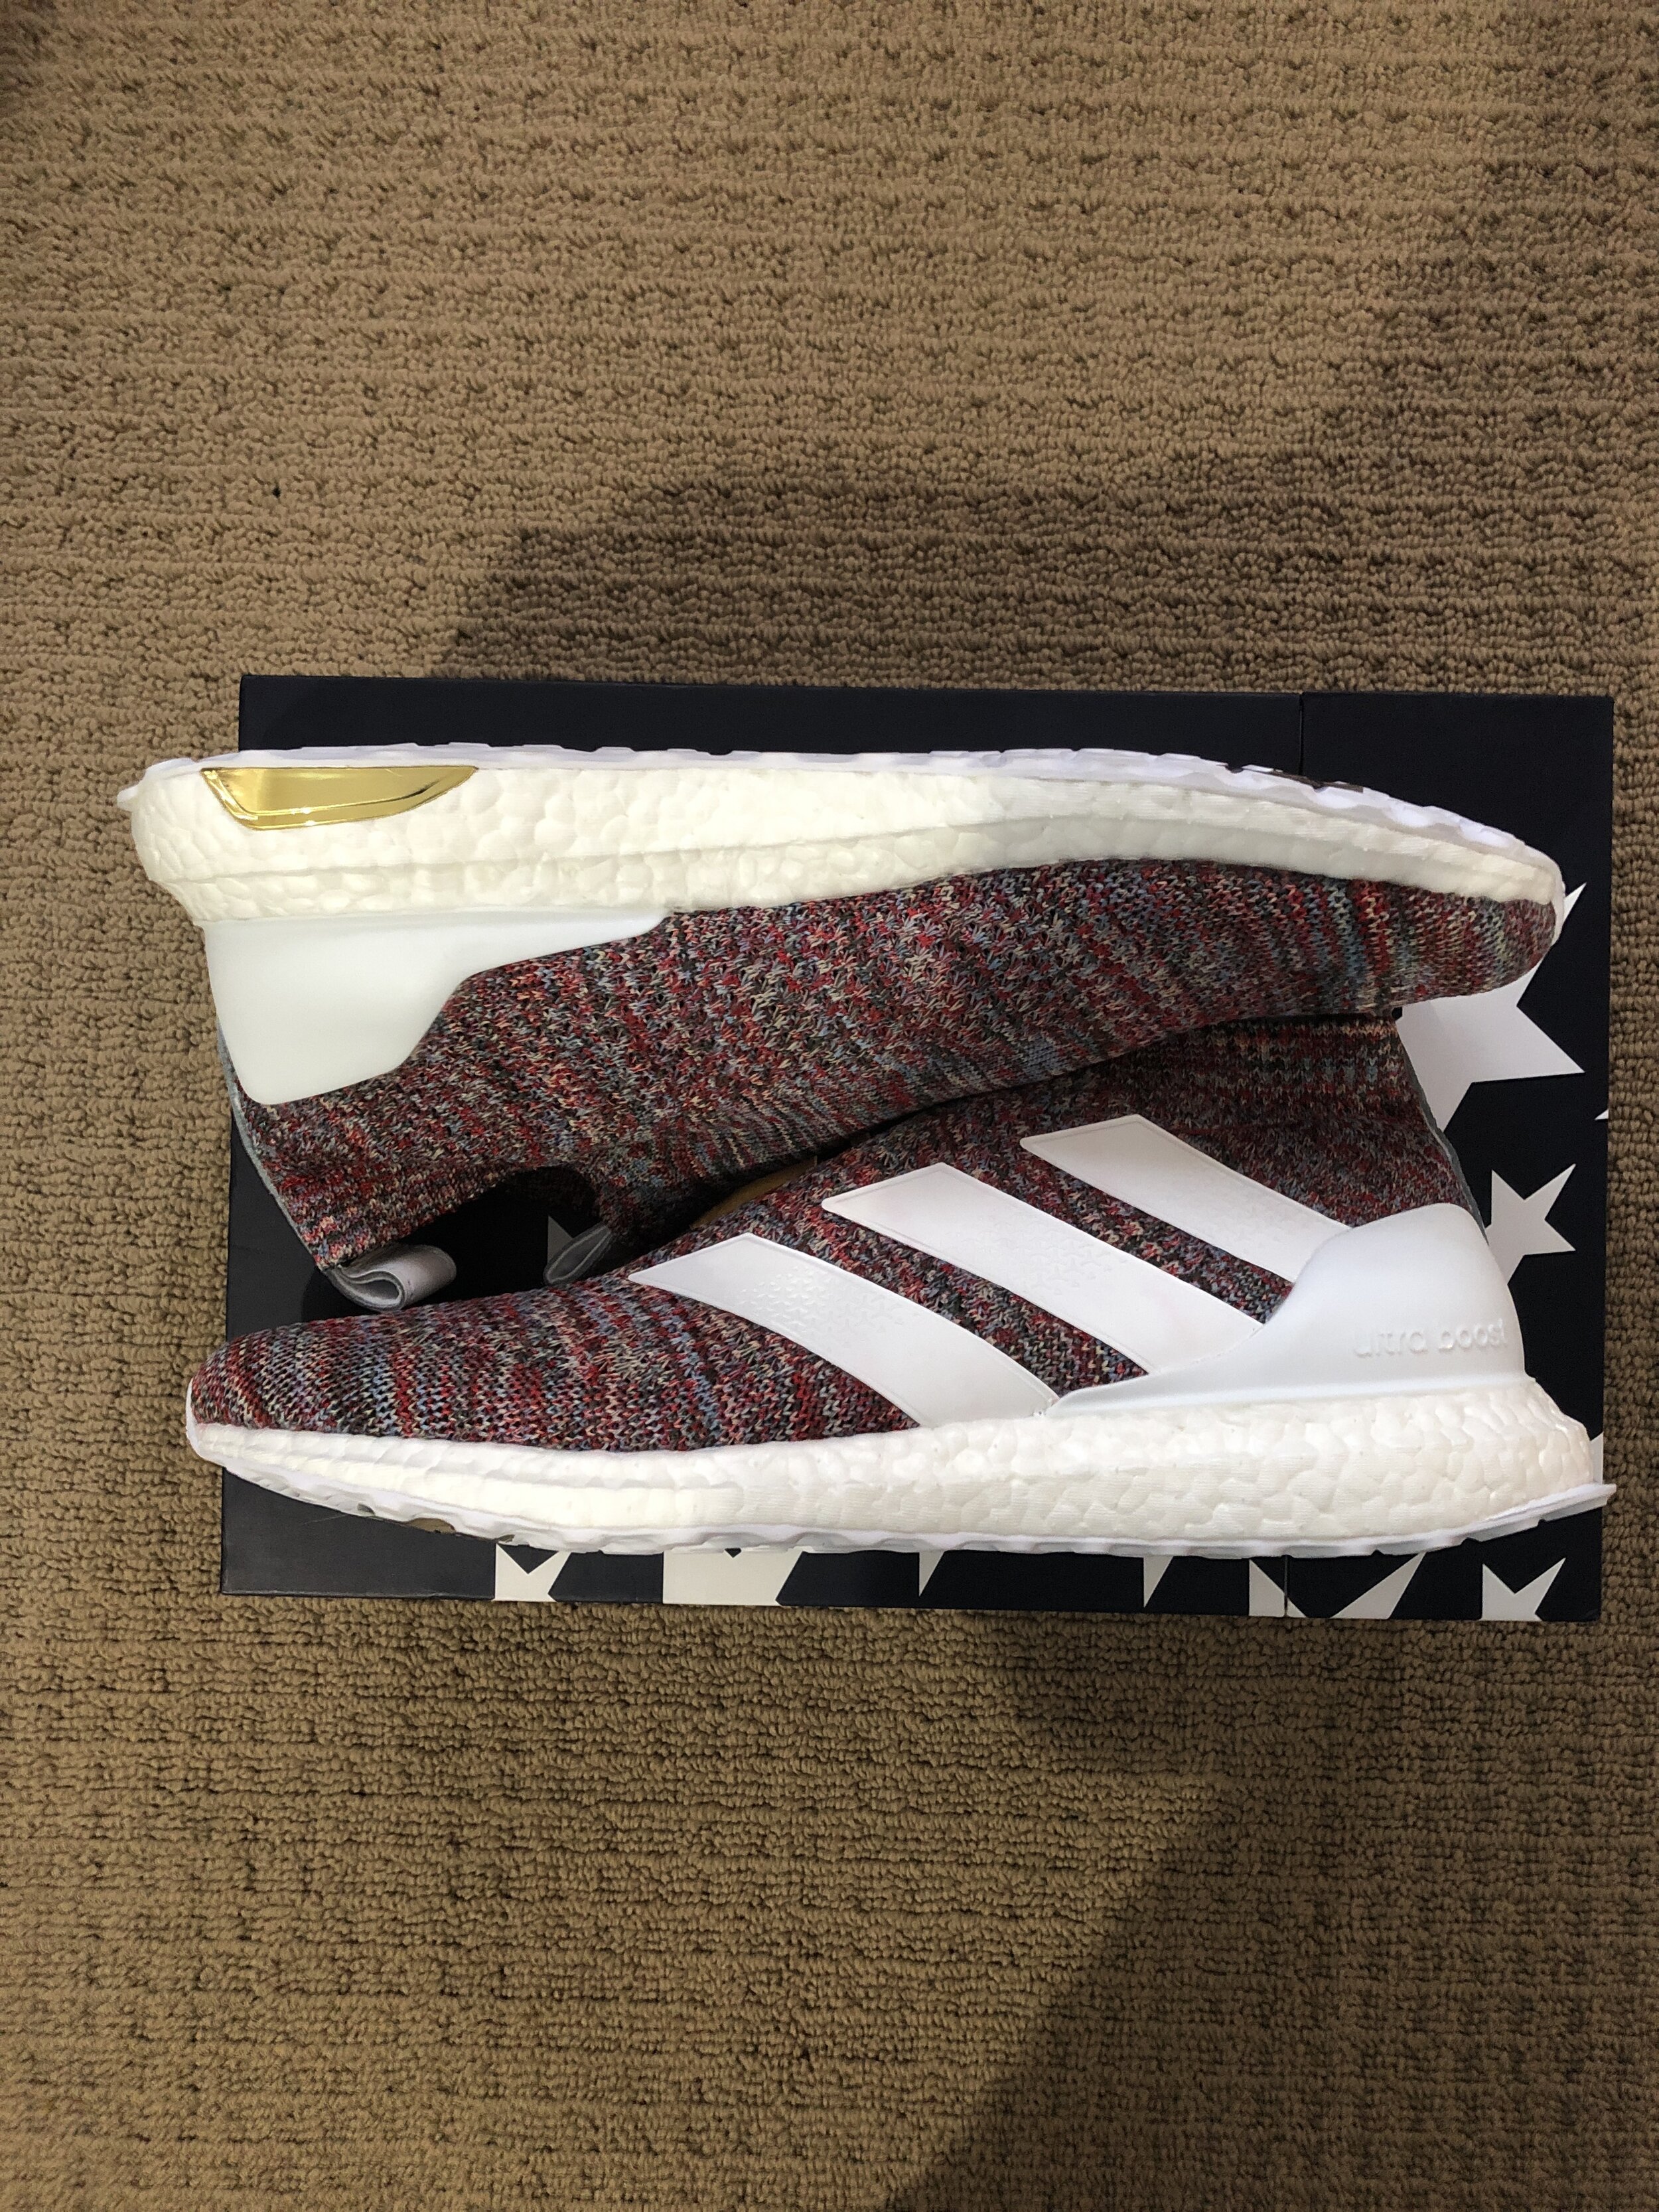 adidas copa ace 16 purecontrol ultra boost kith golden goal